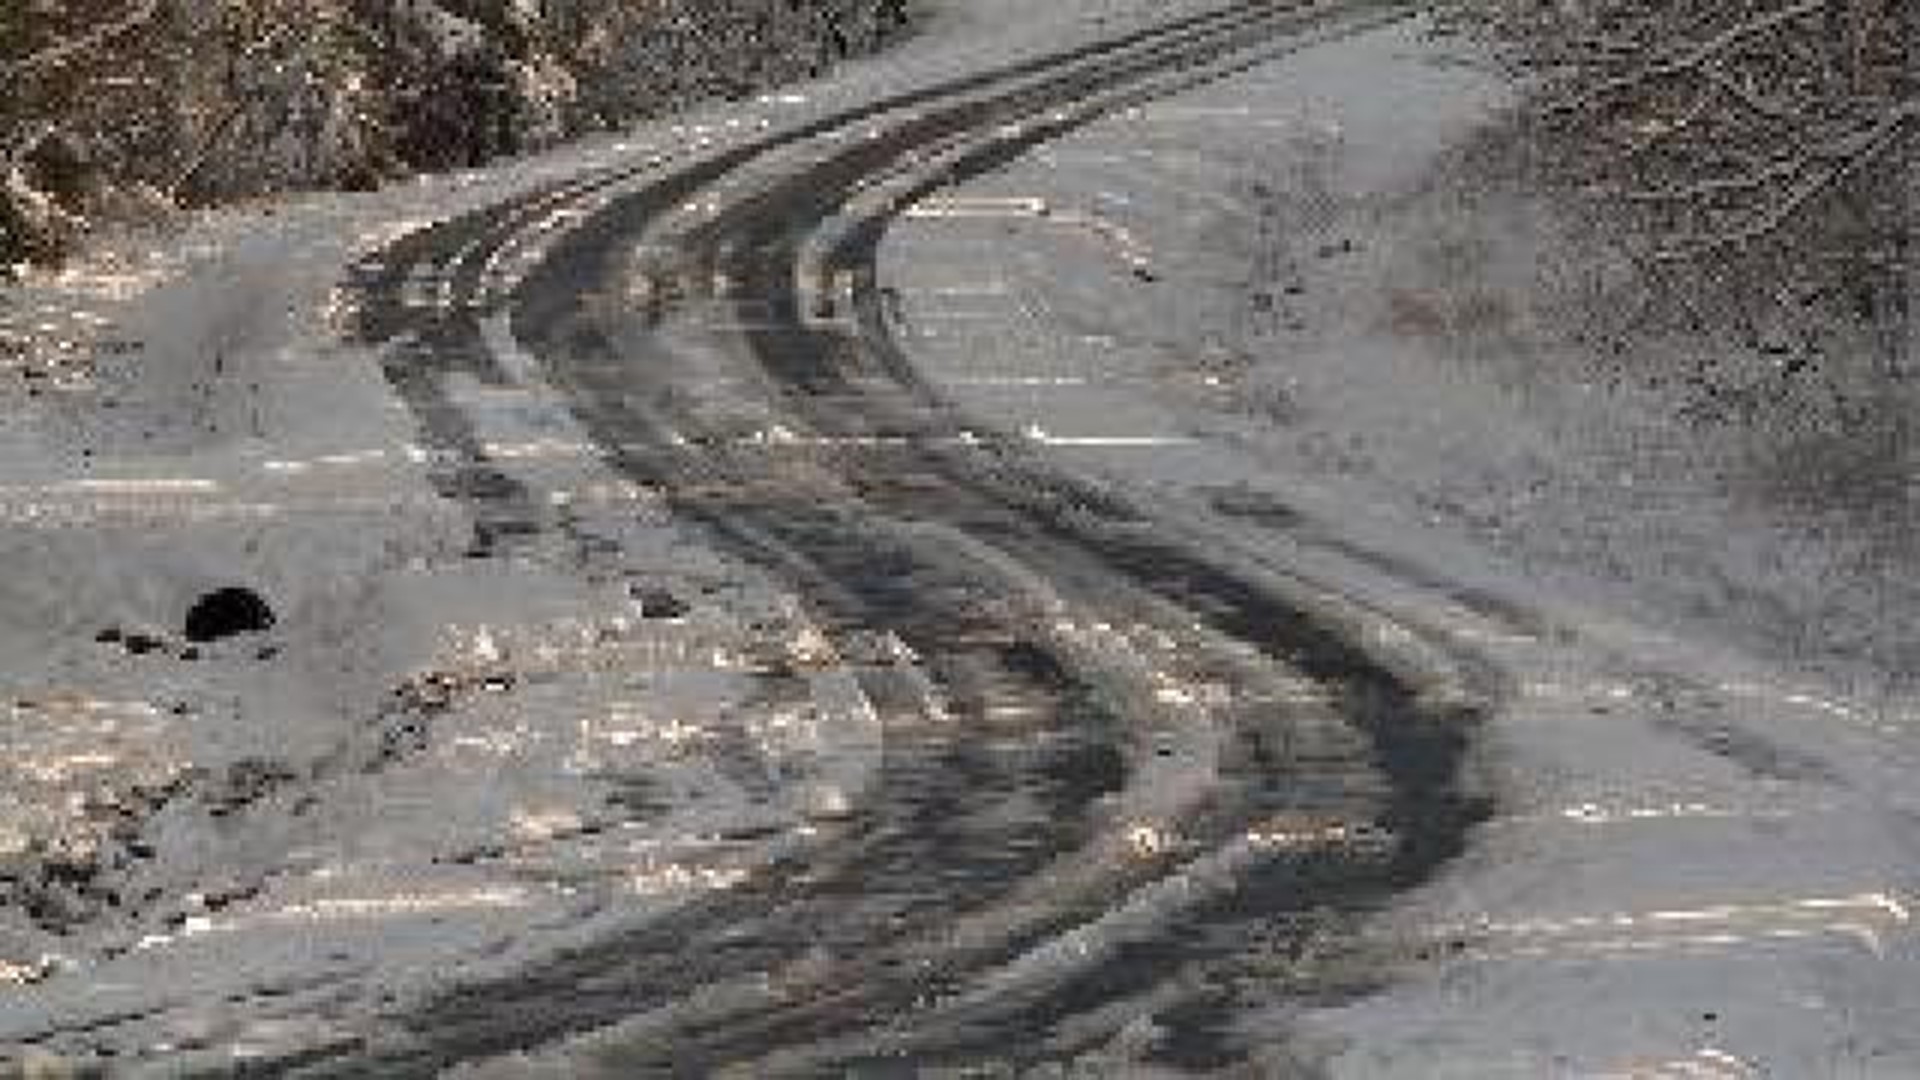 Snow Causes Problems for Drivers